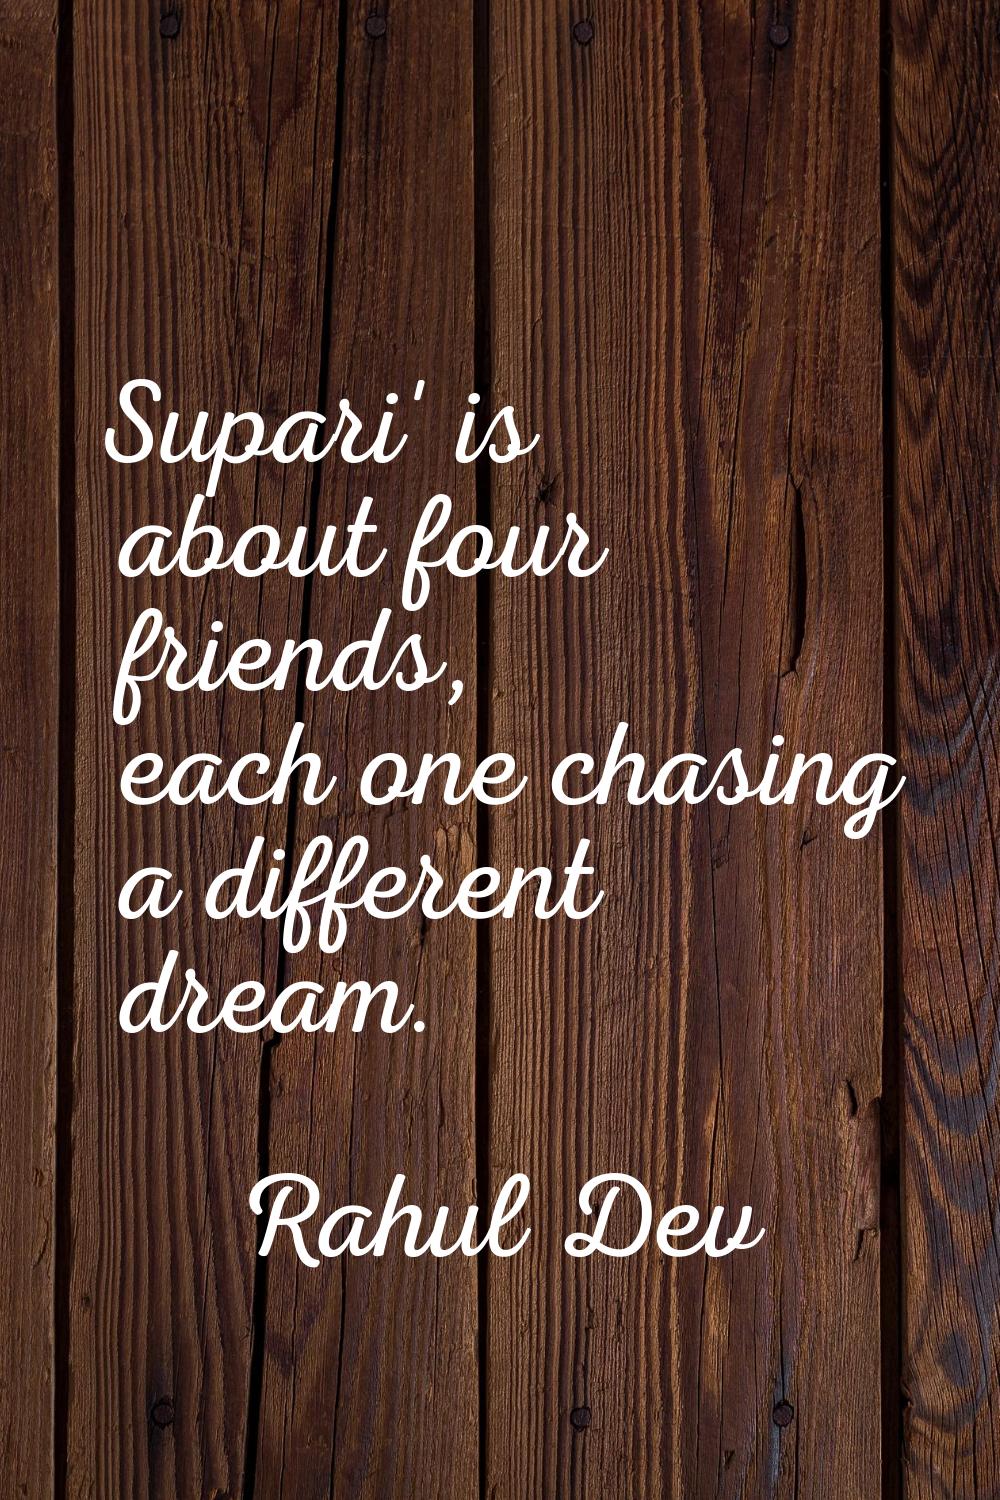 Supari' is about four friends, each one chasing a different dream.